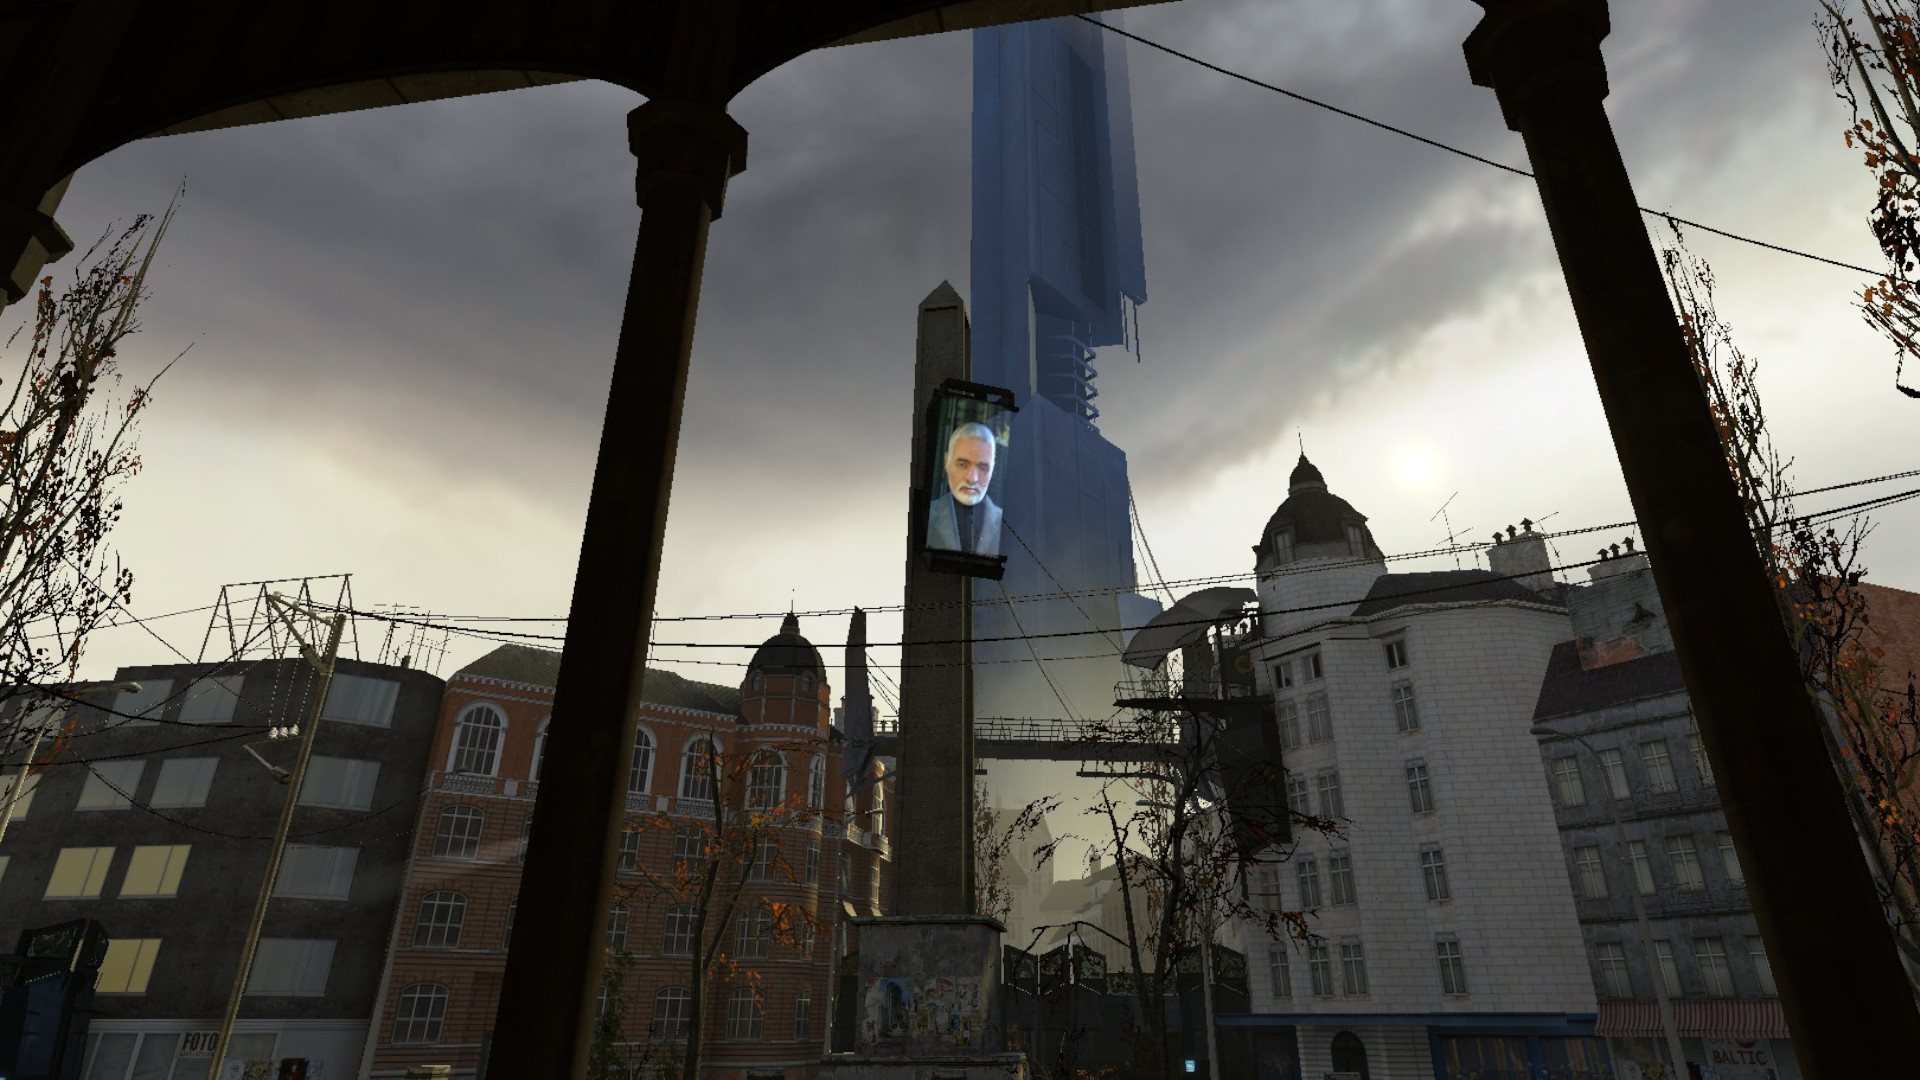 Half-Life 2 Chapter 1: City 17 main square with the Citadel in the background